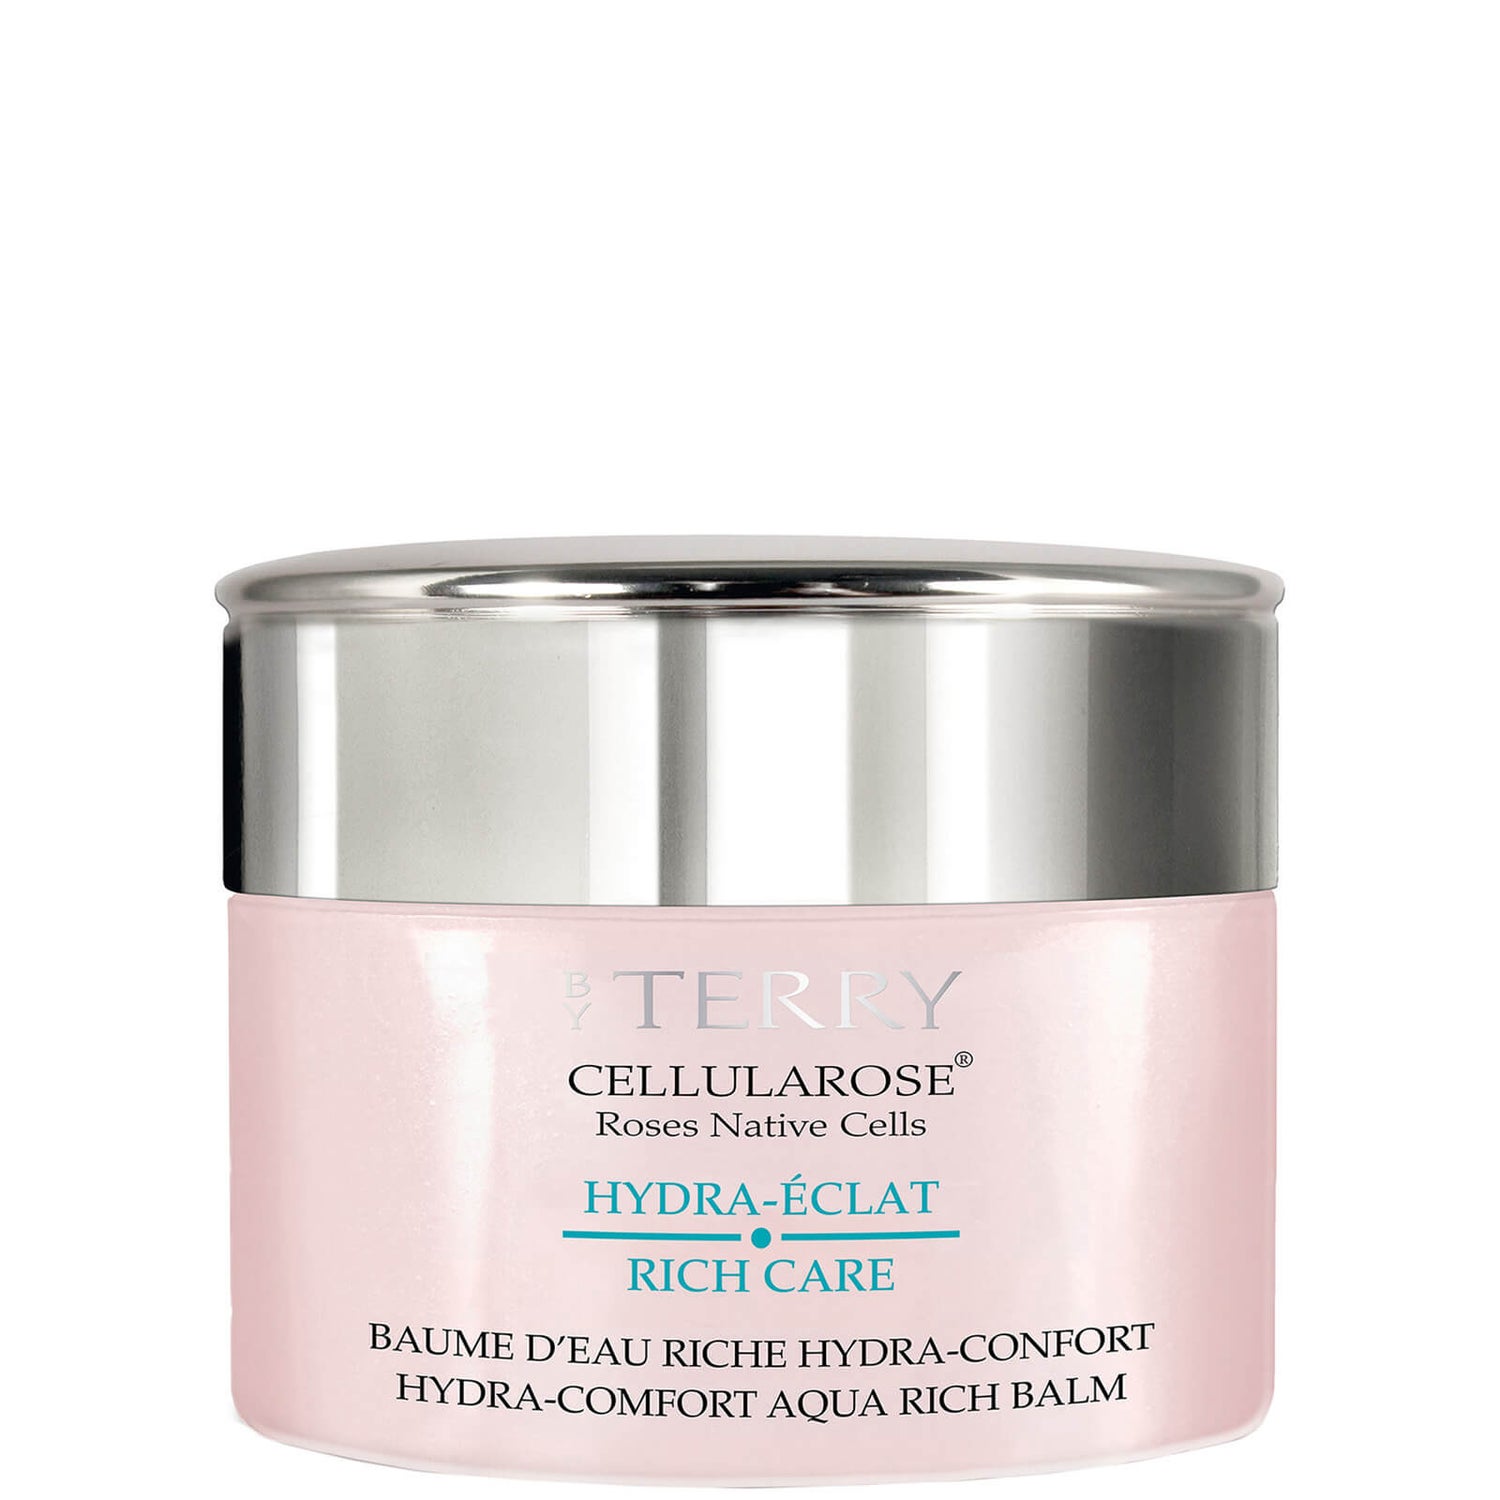 By Terry Cellularose Hydra-Eclat Rich Care Balm 30 ml